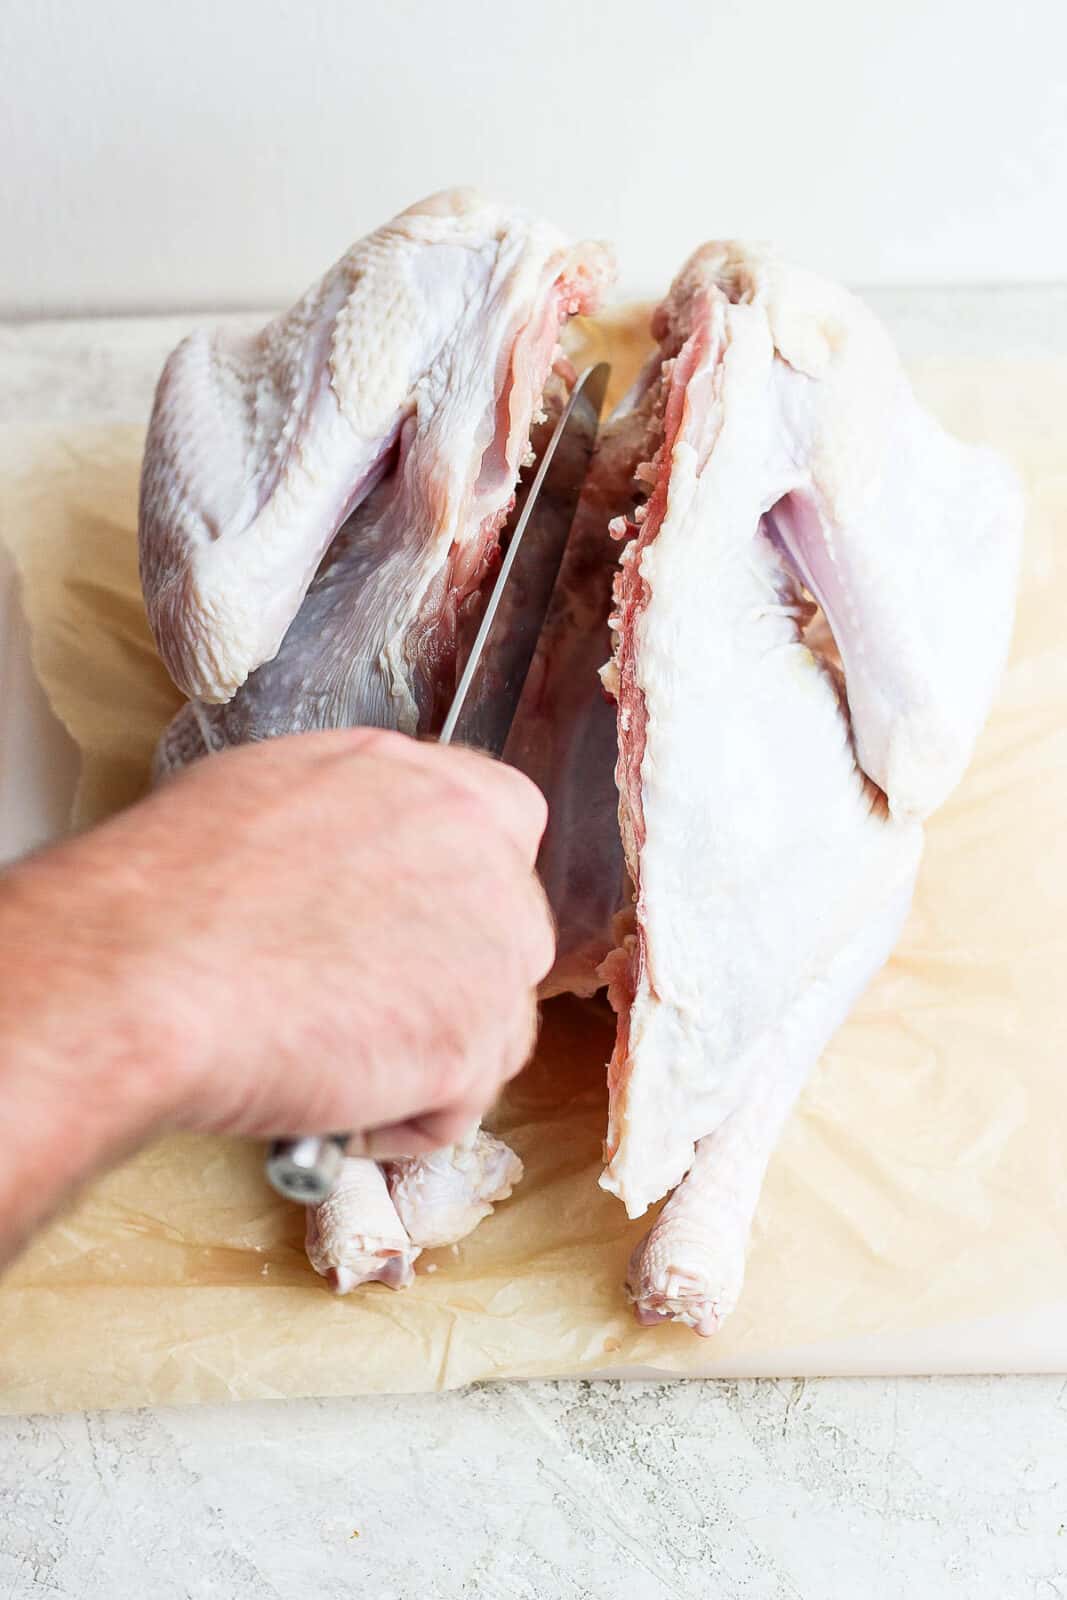 Someone cutting the cartilage by the turkey breastbone to help spatchcock it. 